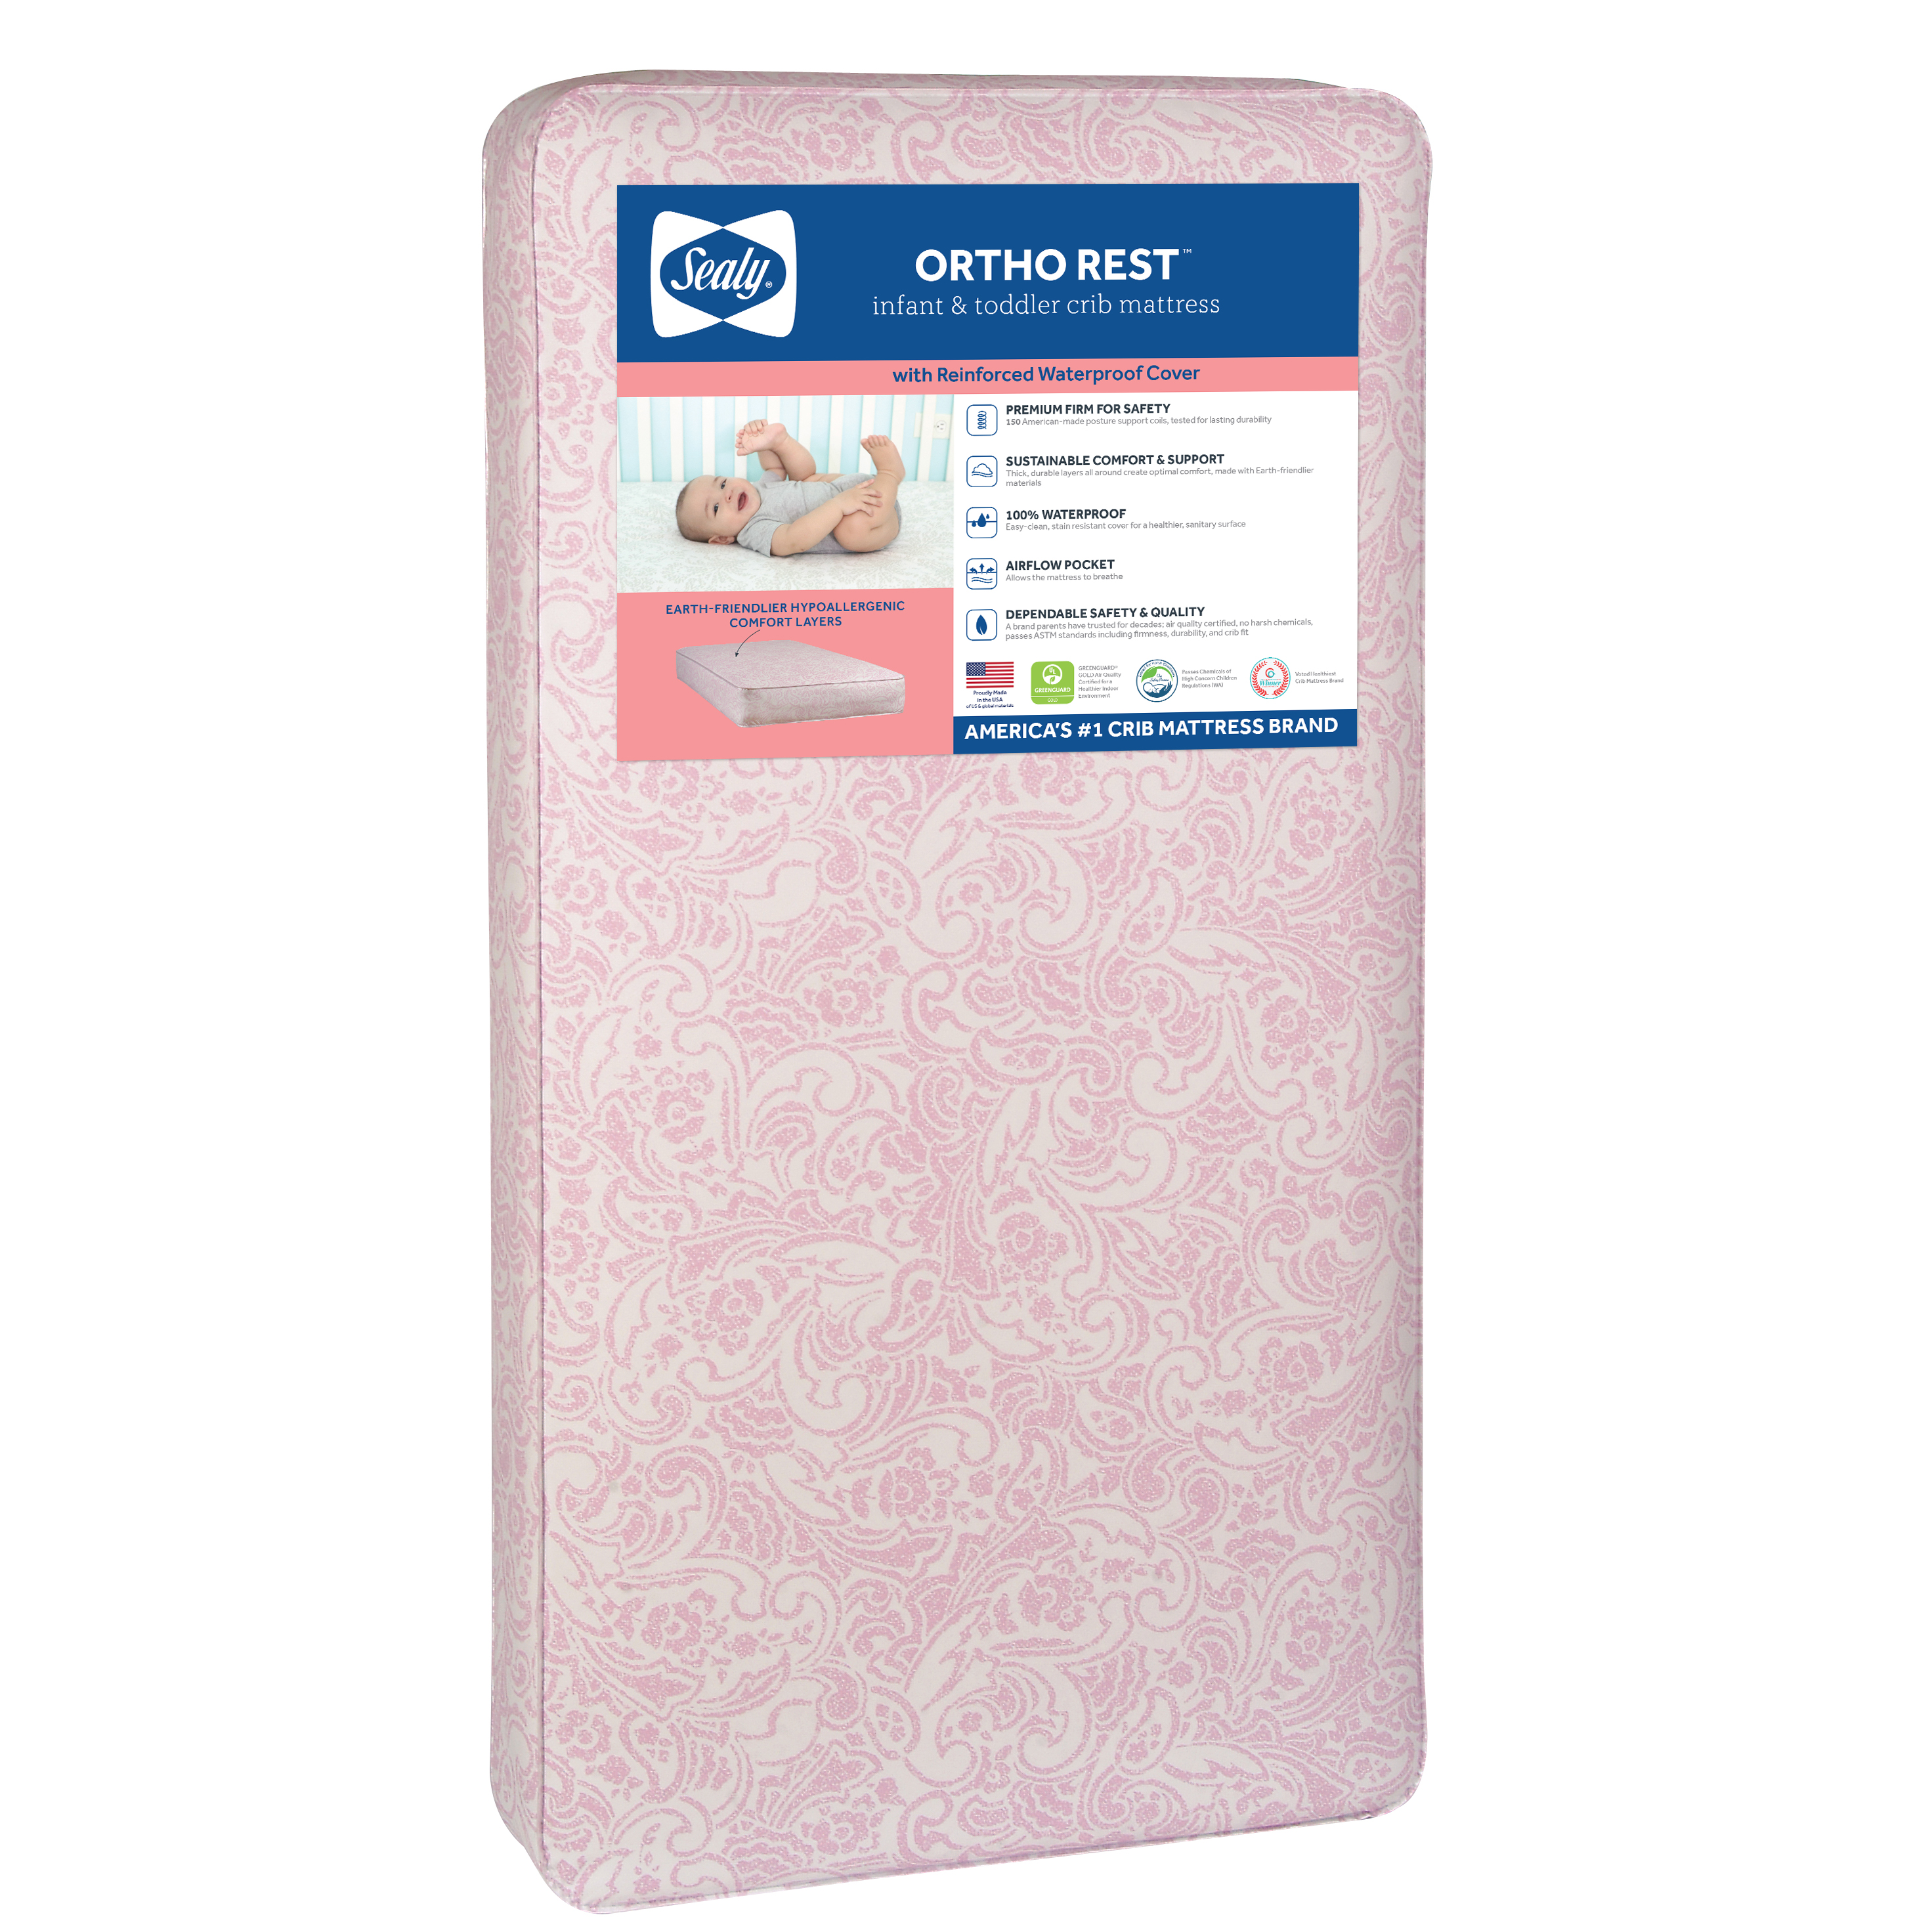 Sealy Ortho Rest Premium Firm Baby Crib & Toddler Mattress, 150 Coil, Pink - image 1 of 13